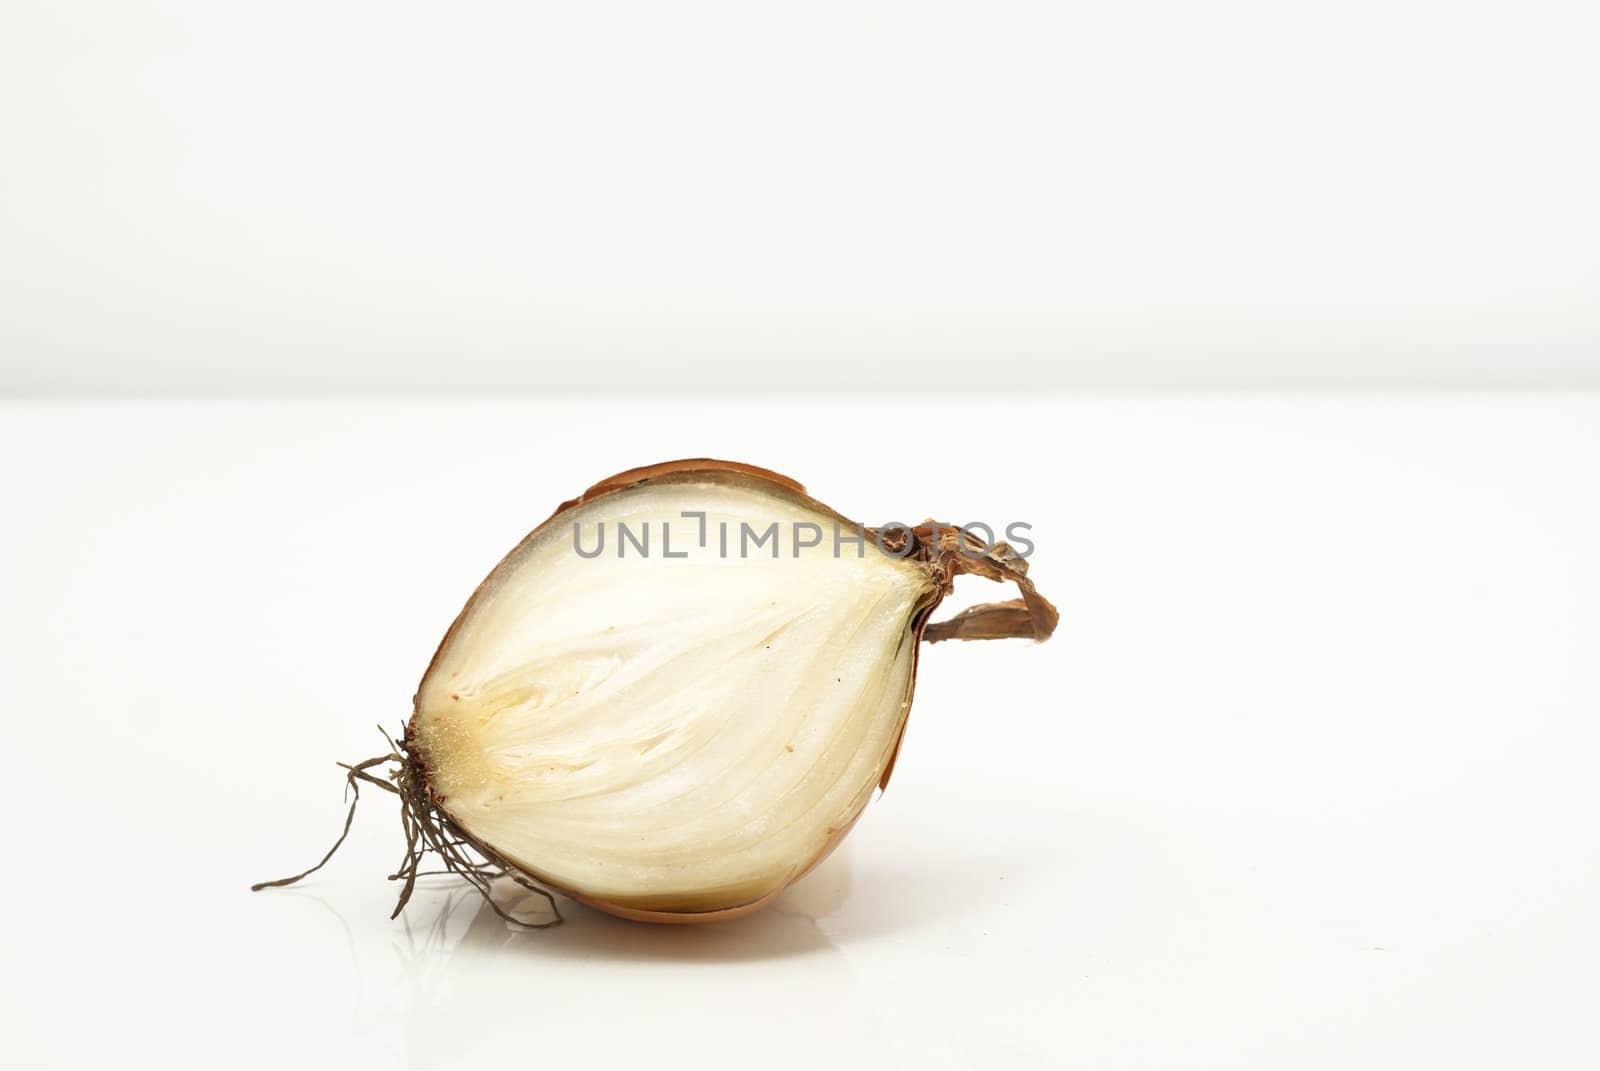 Fresh bulb of onion on a white background.